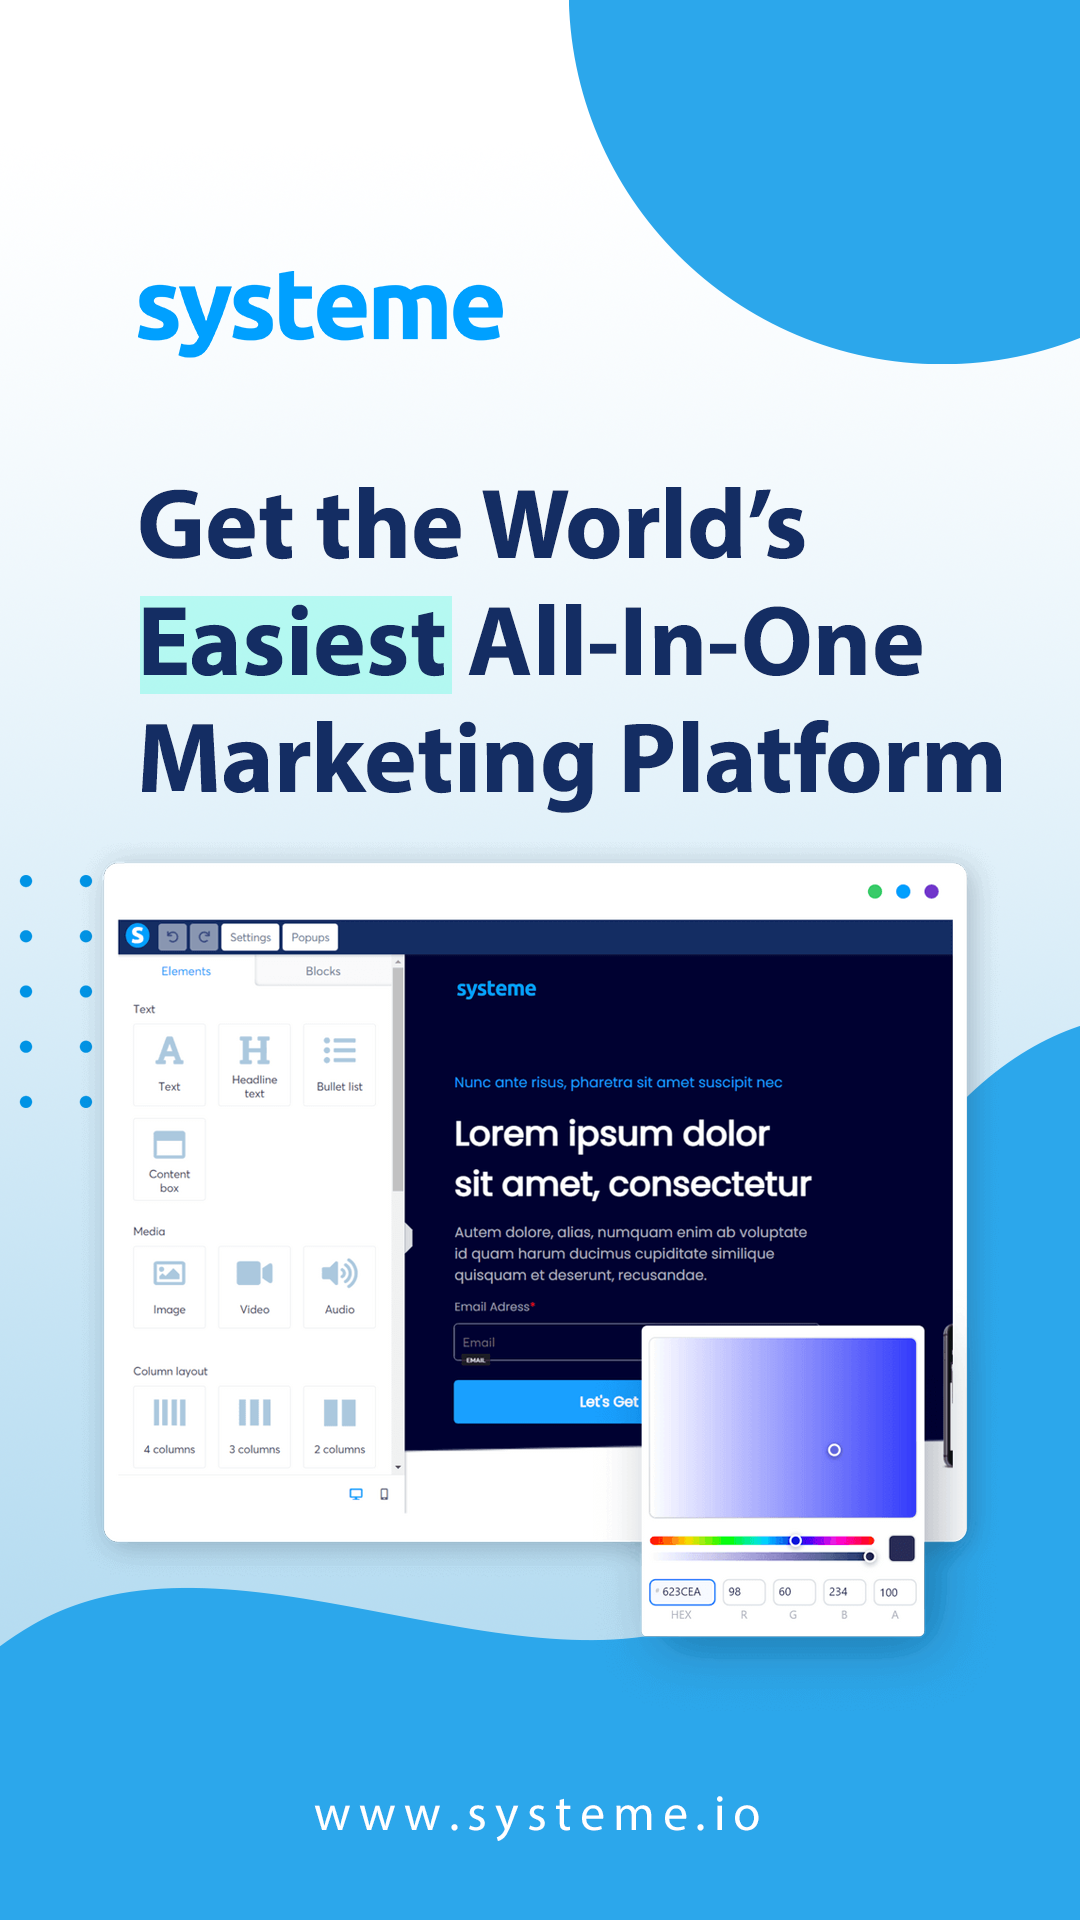 Systeme get the world's easiest all-in-one marketing platform.